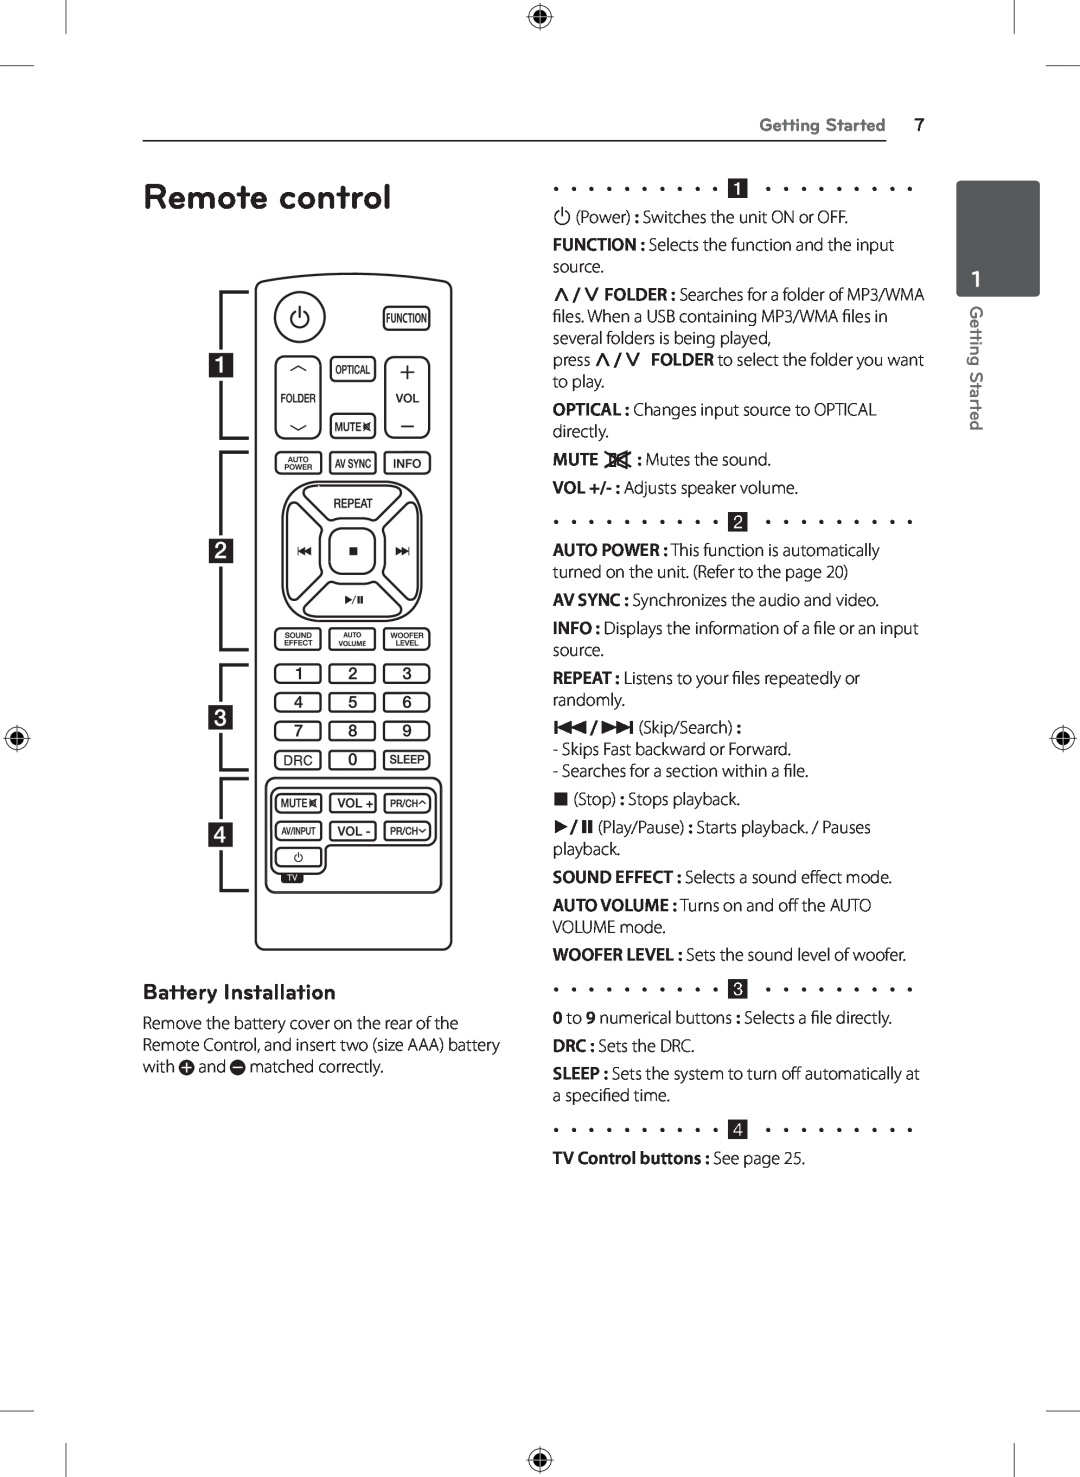 LG Electronics NB4530A, S43A1-D owner manual Remote control, Battery Installation, TV Control buttons See page 